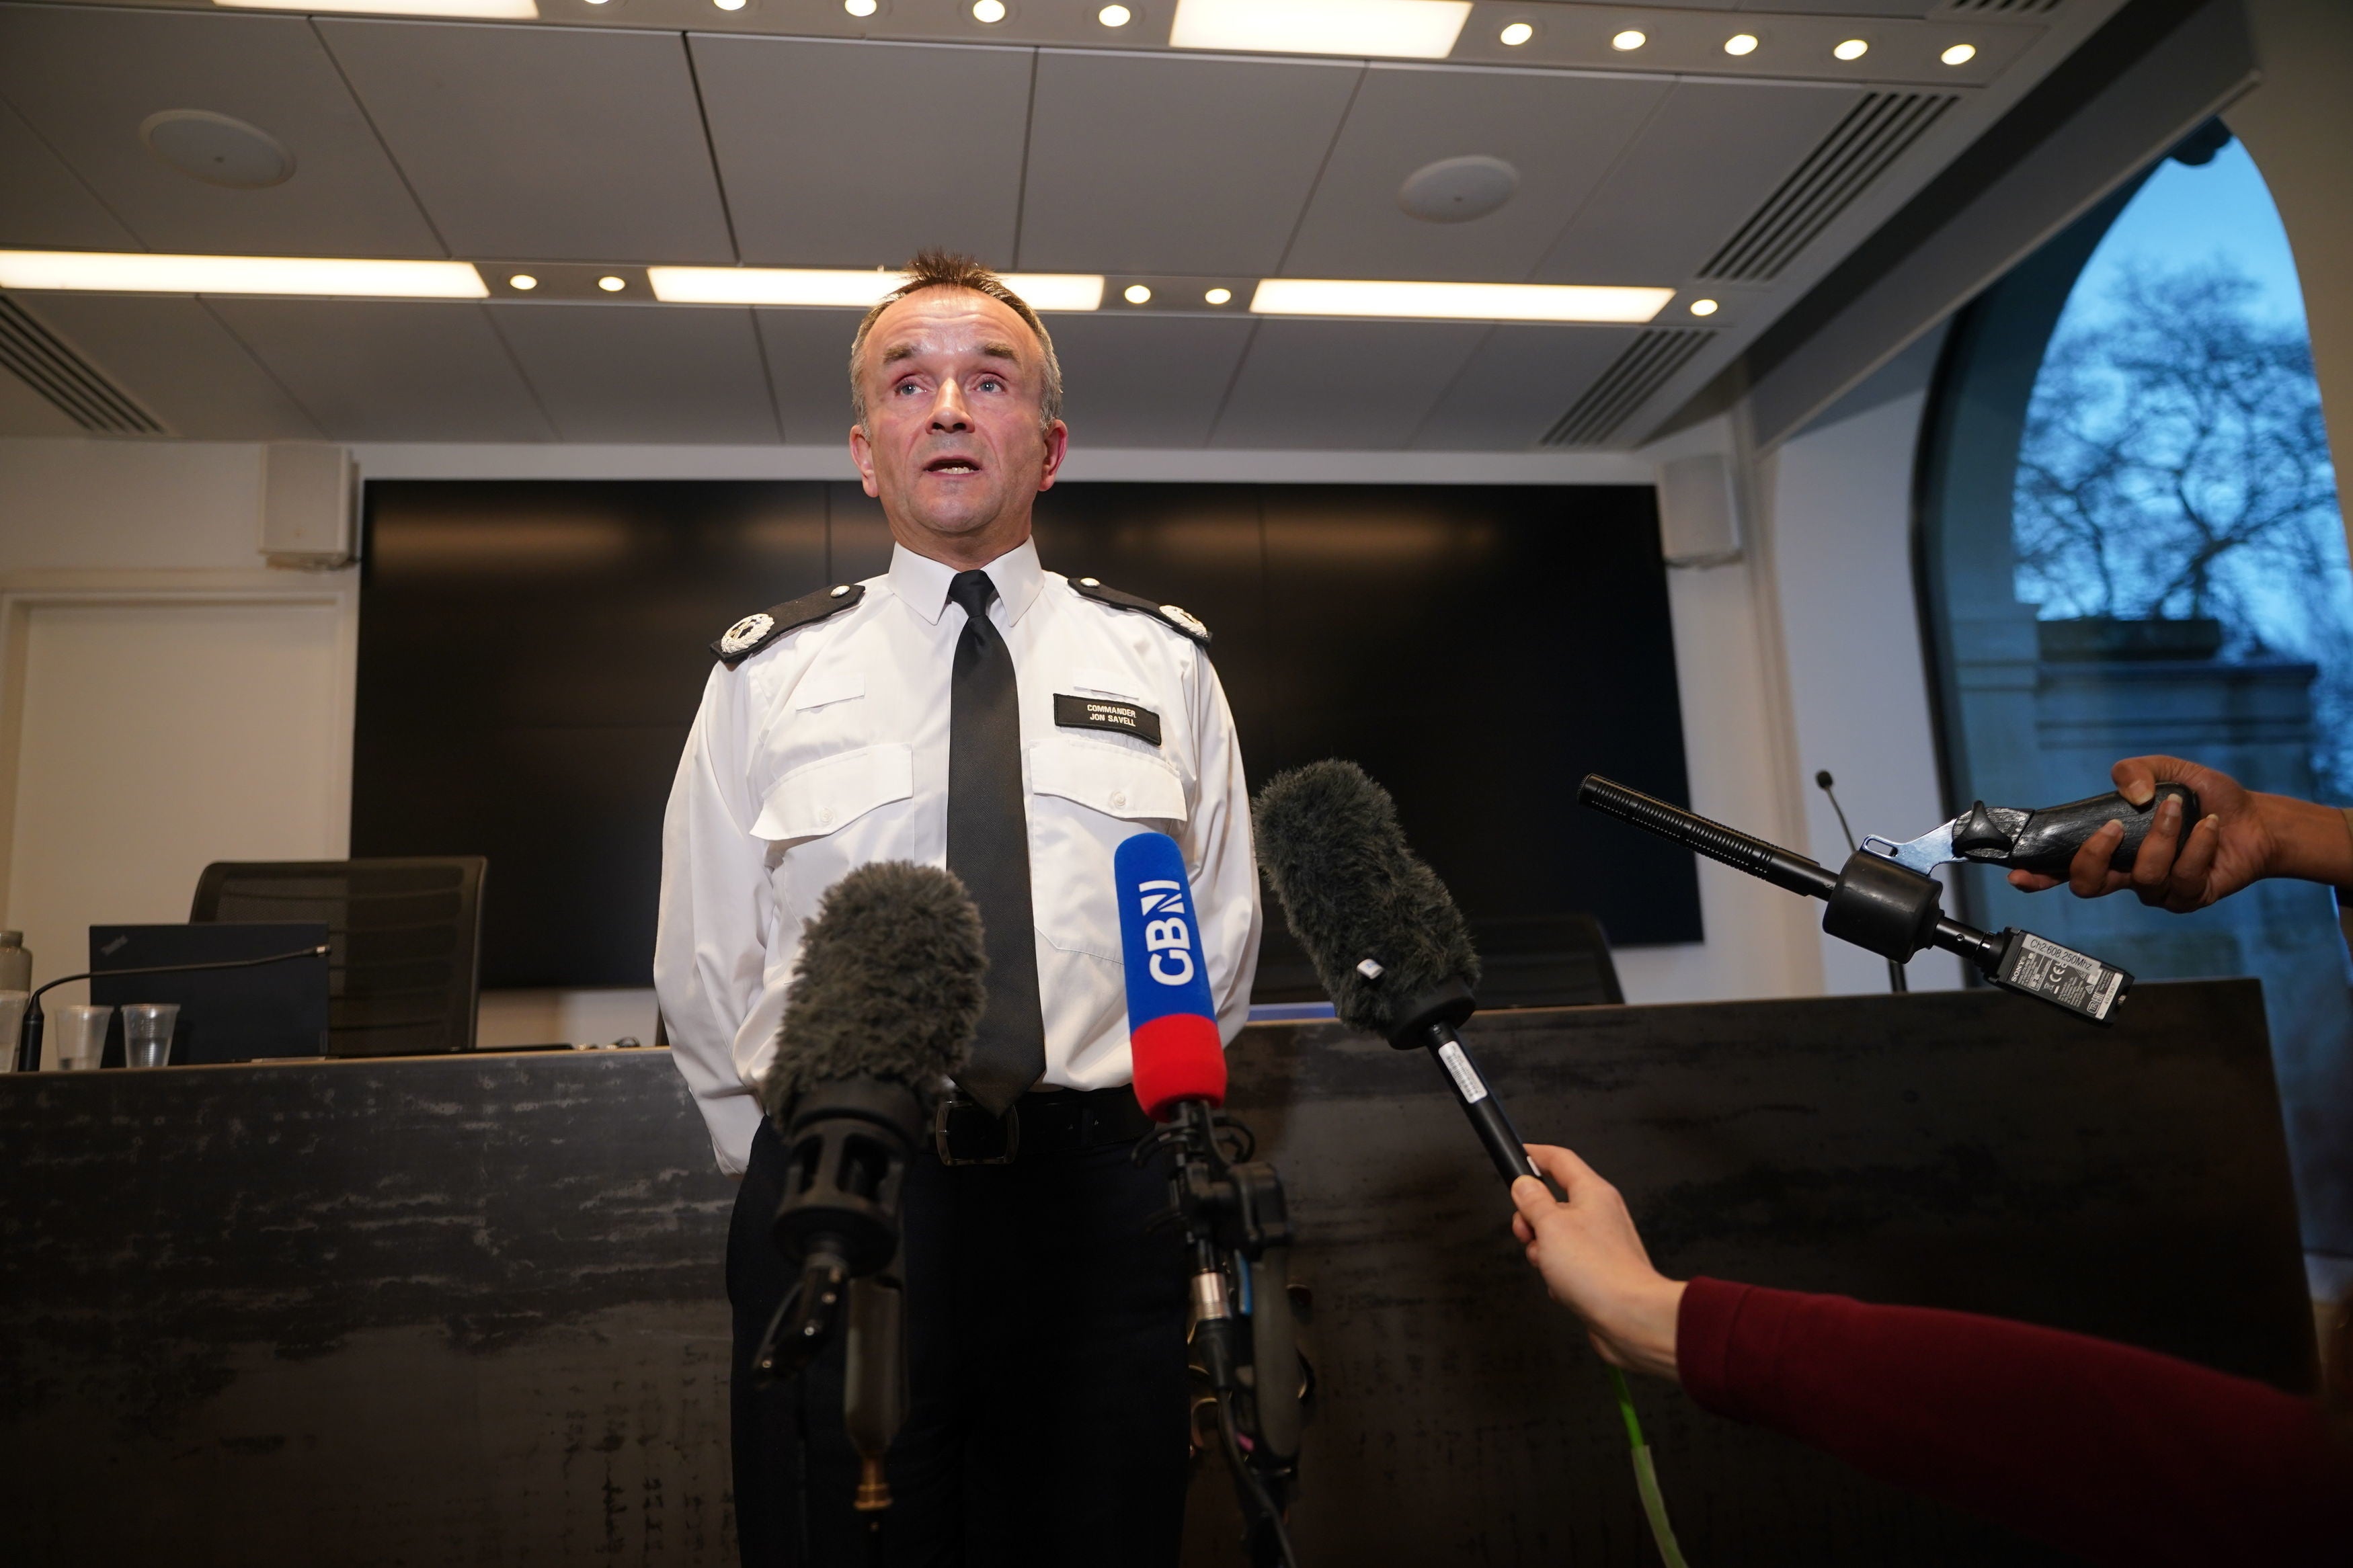 Commander Jon Savell said alkali attack suspect Abdul Ezedi is believed to have “gone into” the River Thames